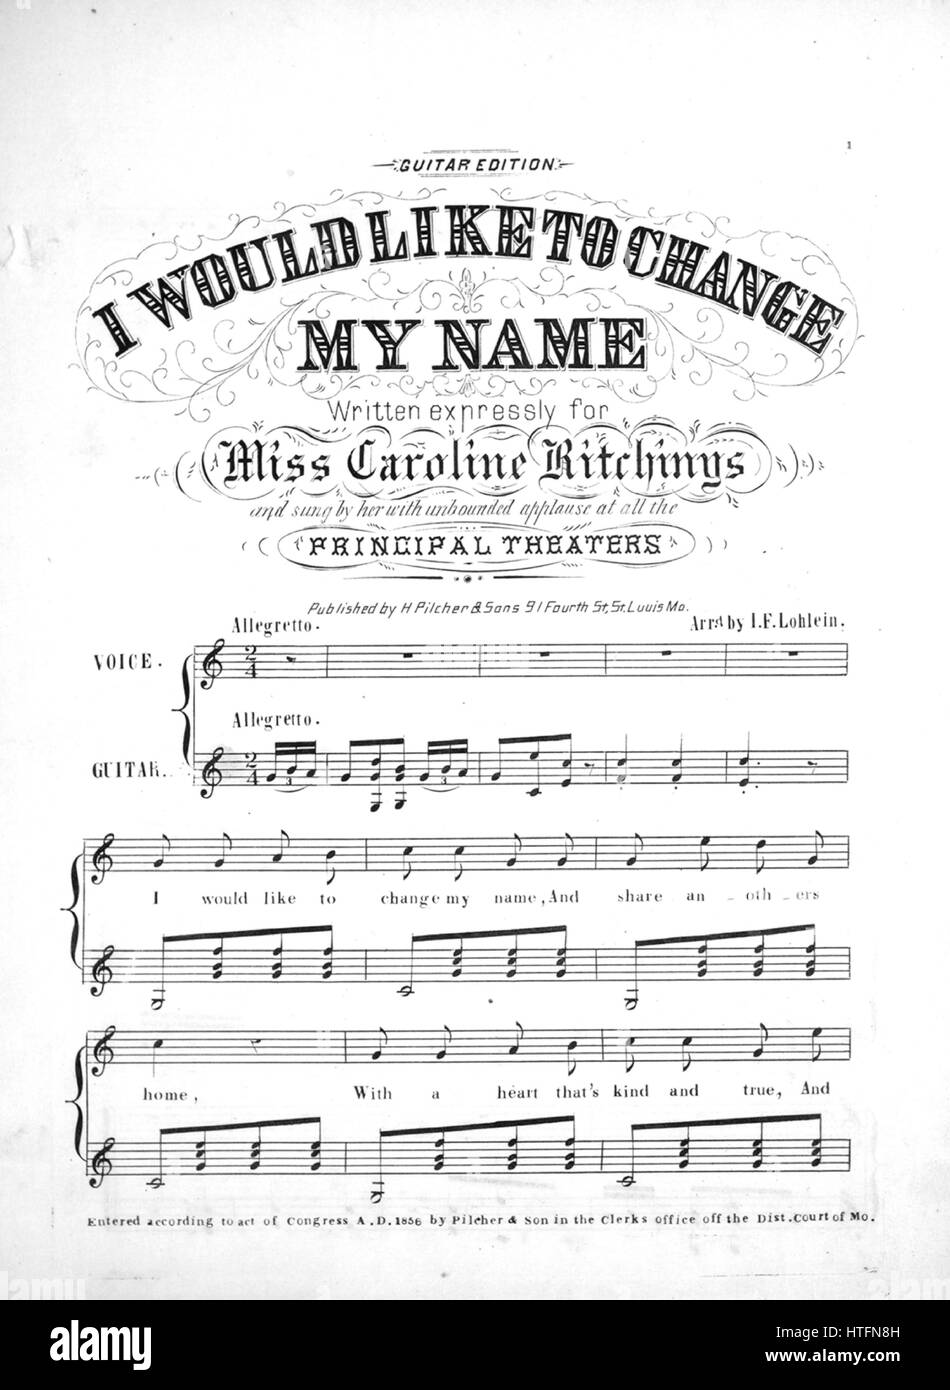 Sheet music cover image of the song 'I Would Like to Change My Name Guitar  Edition', with original authorship notes reading 'Composer na Arrd by IF  Lohlein', 1856. The publisher is listed